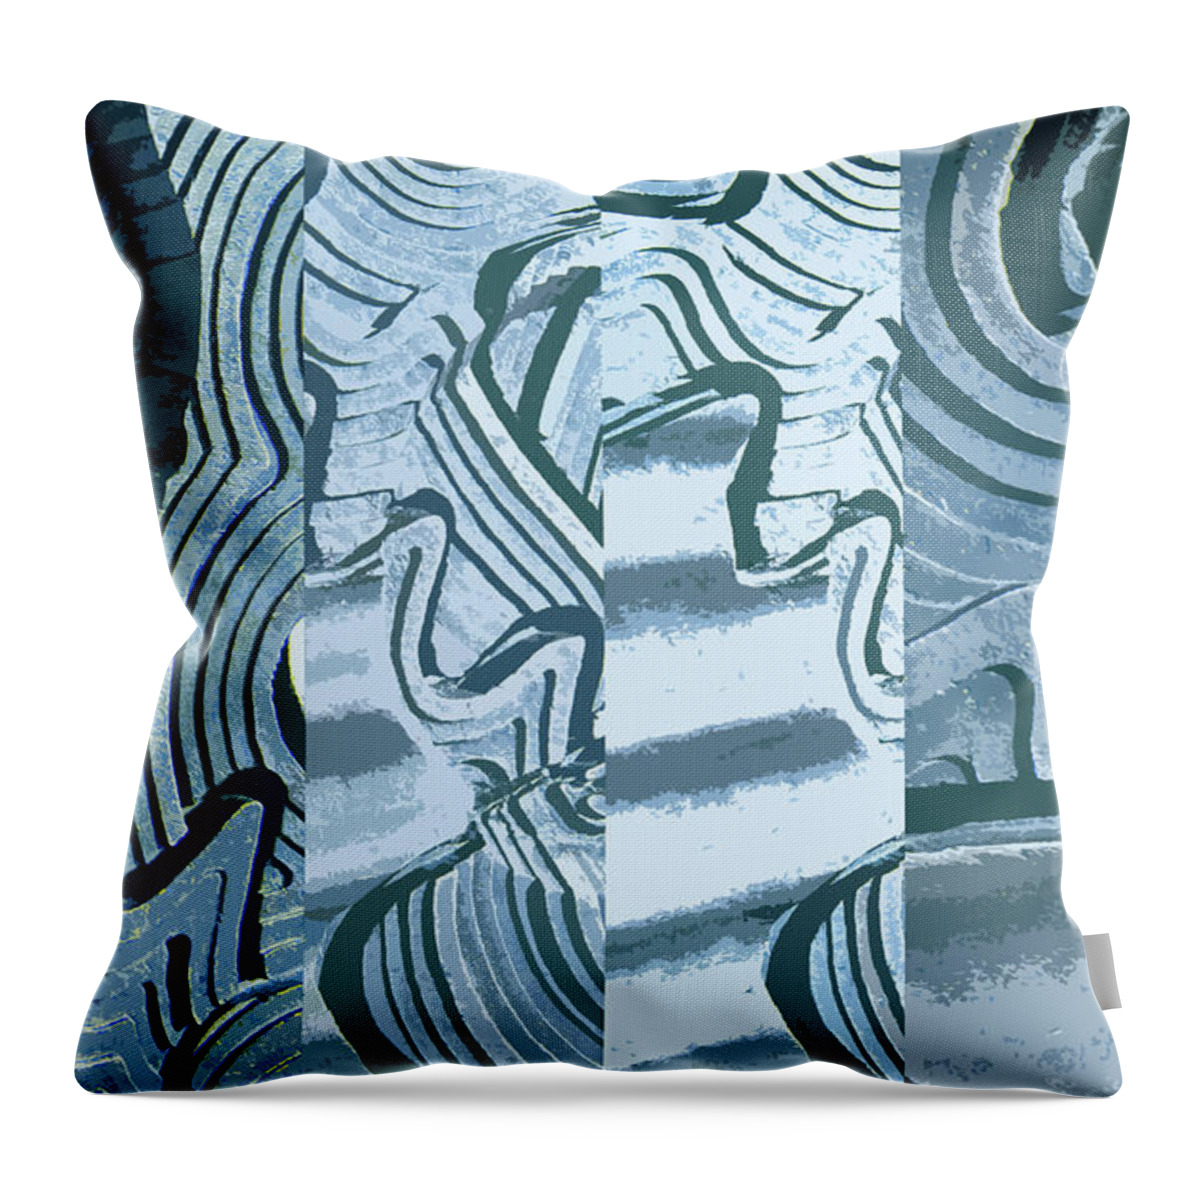 Abstract Throw Pillow featuring the photograph Abstract No. 57-1 by Sandy Taylor